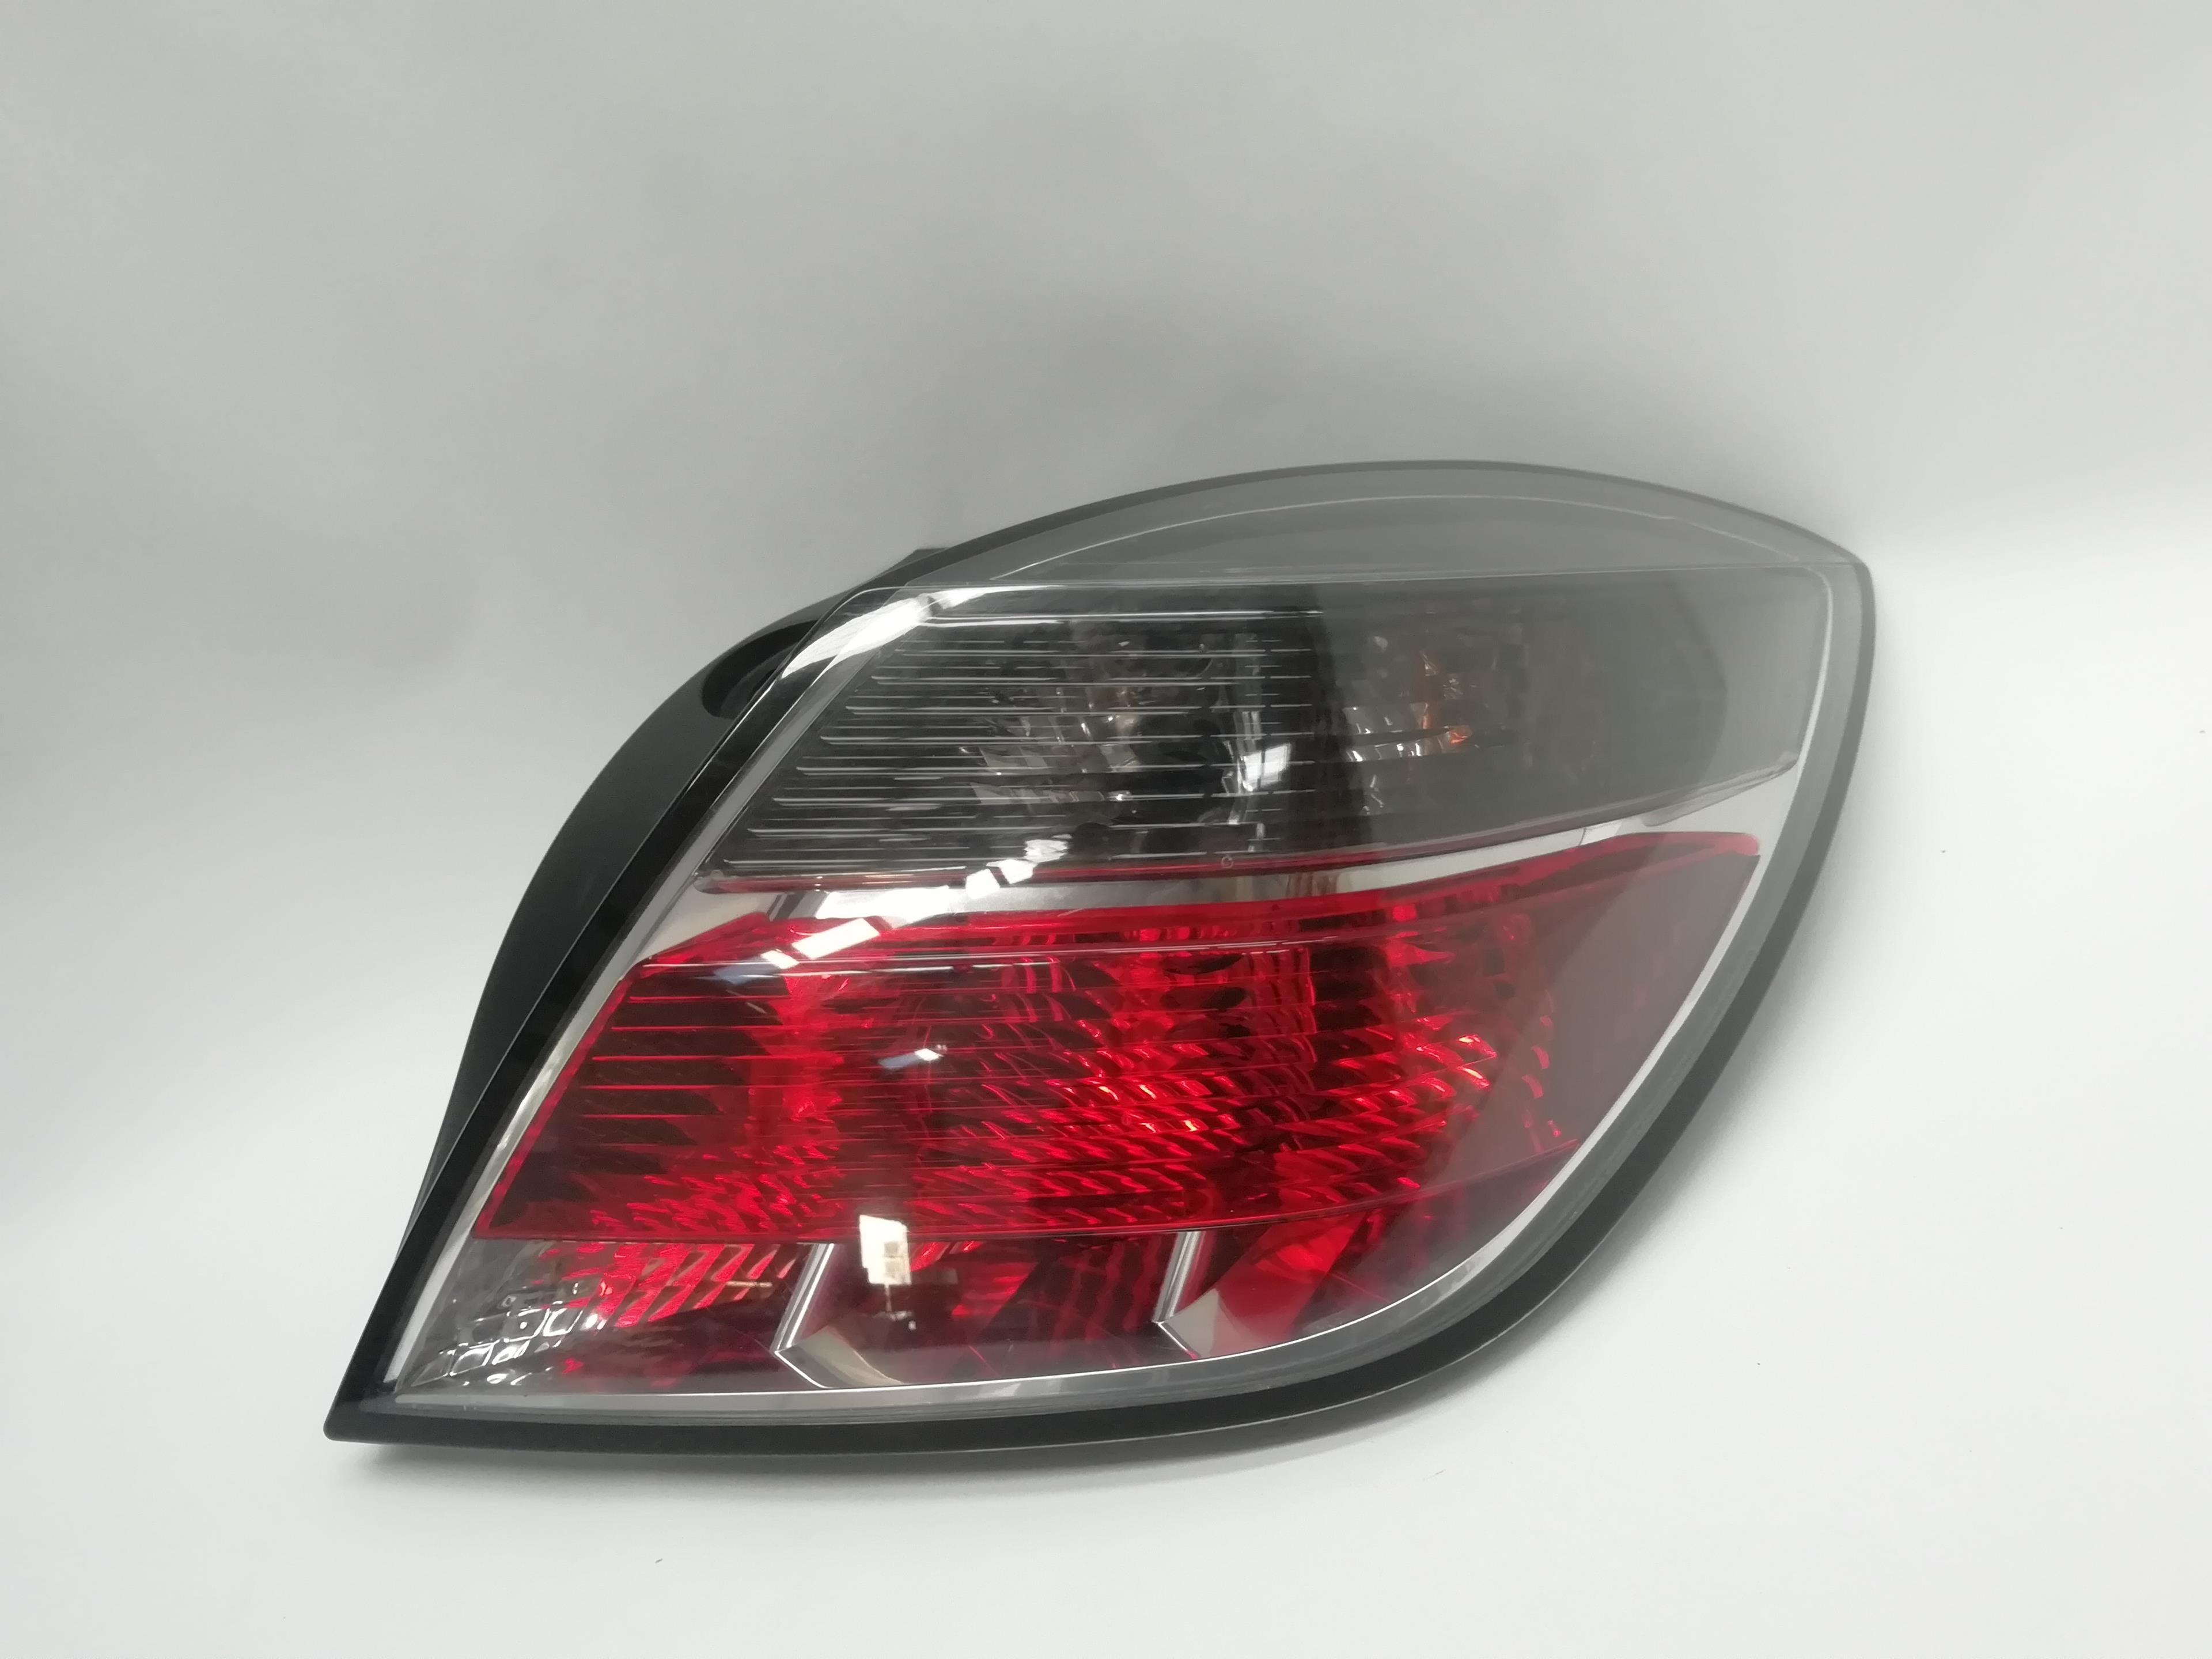 OPEL Astra H (2004-2014) Rear Right Taillight Lamp 1222118, 342691834, 00874802 24030853